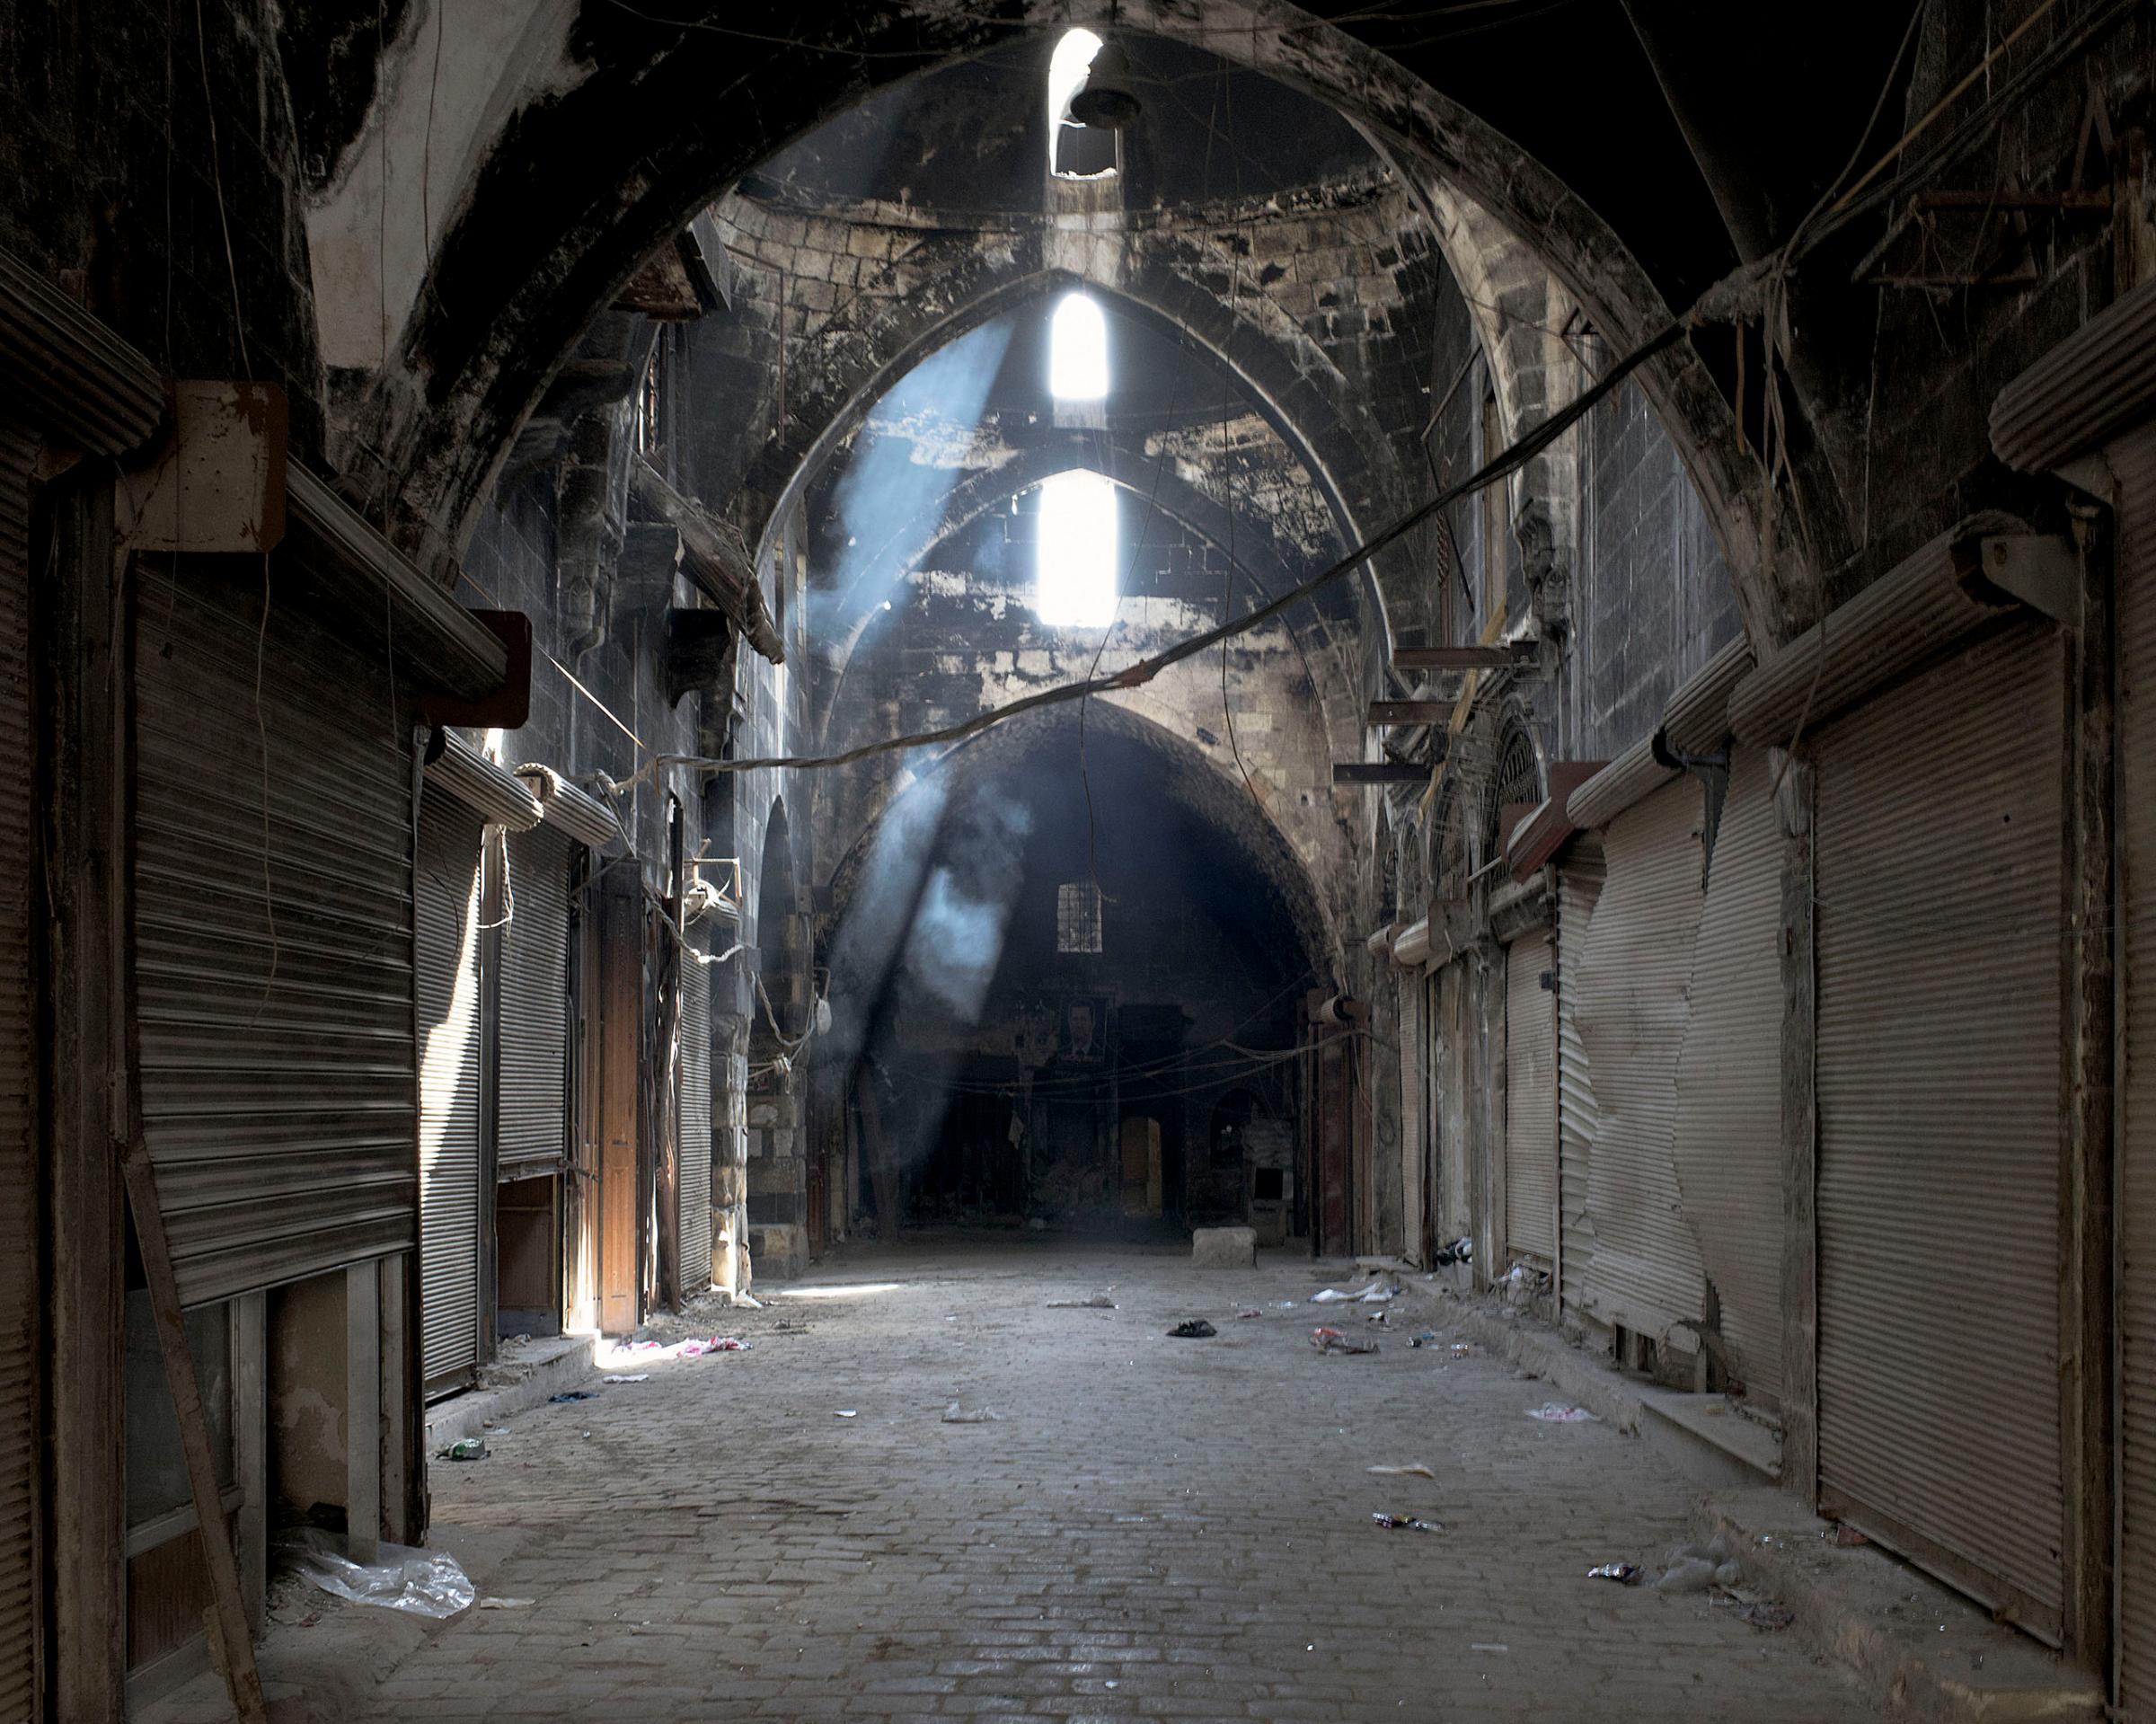 A view inside the ancient Souk of Aleppo, a UNESCO World Heritage site, March 2016.